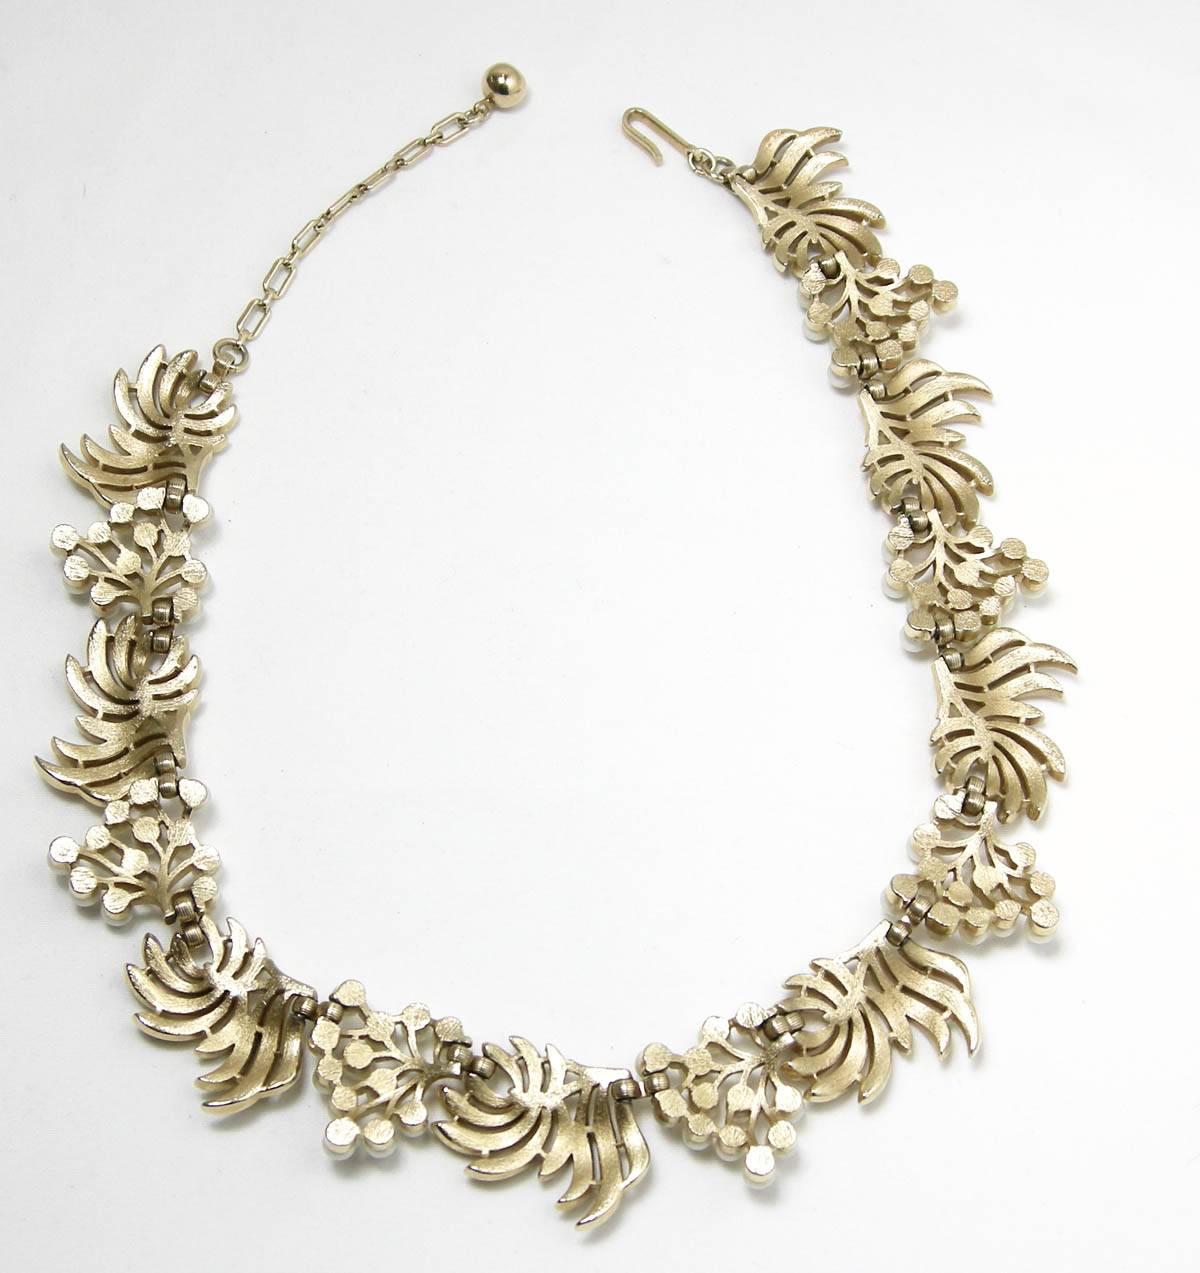 This famous vintage Trifari necklace was very popular in the 1950s and is considered a must-have for every important collection.  It features gold tone metal leaves that alternate with round faux pearls. It is signed “Trifari” and measures 16-1/2” x